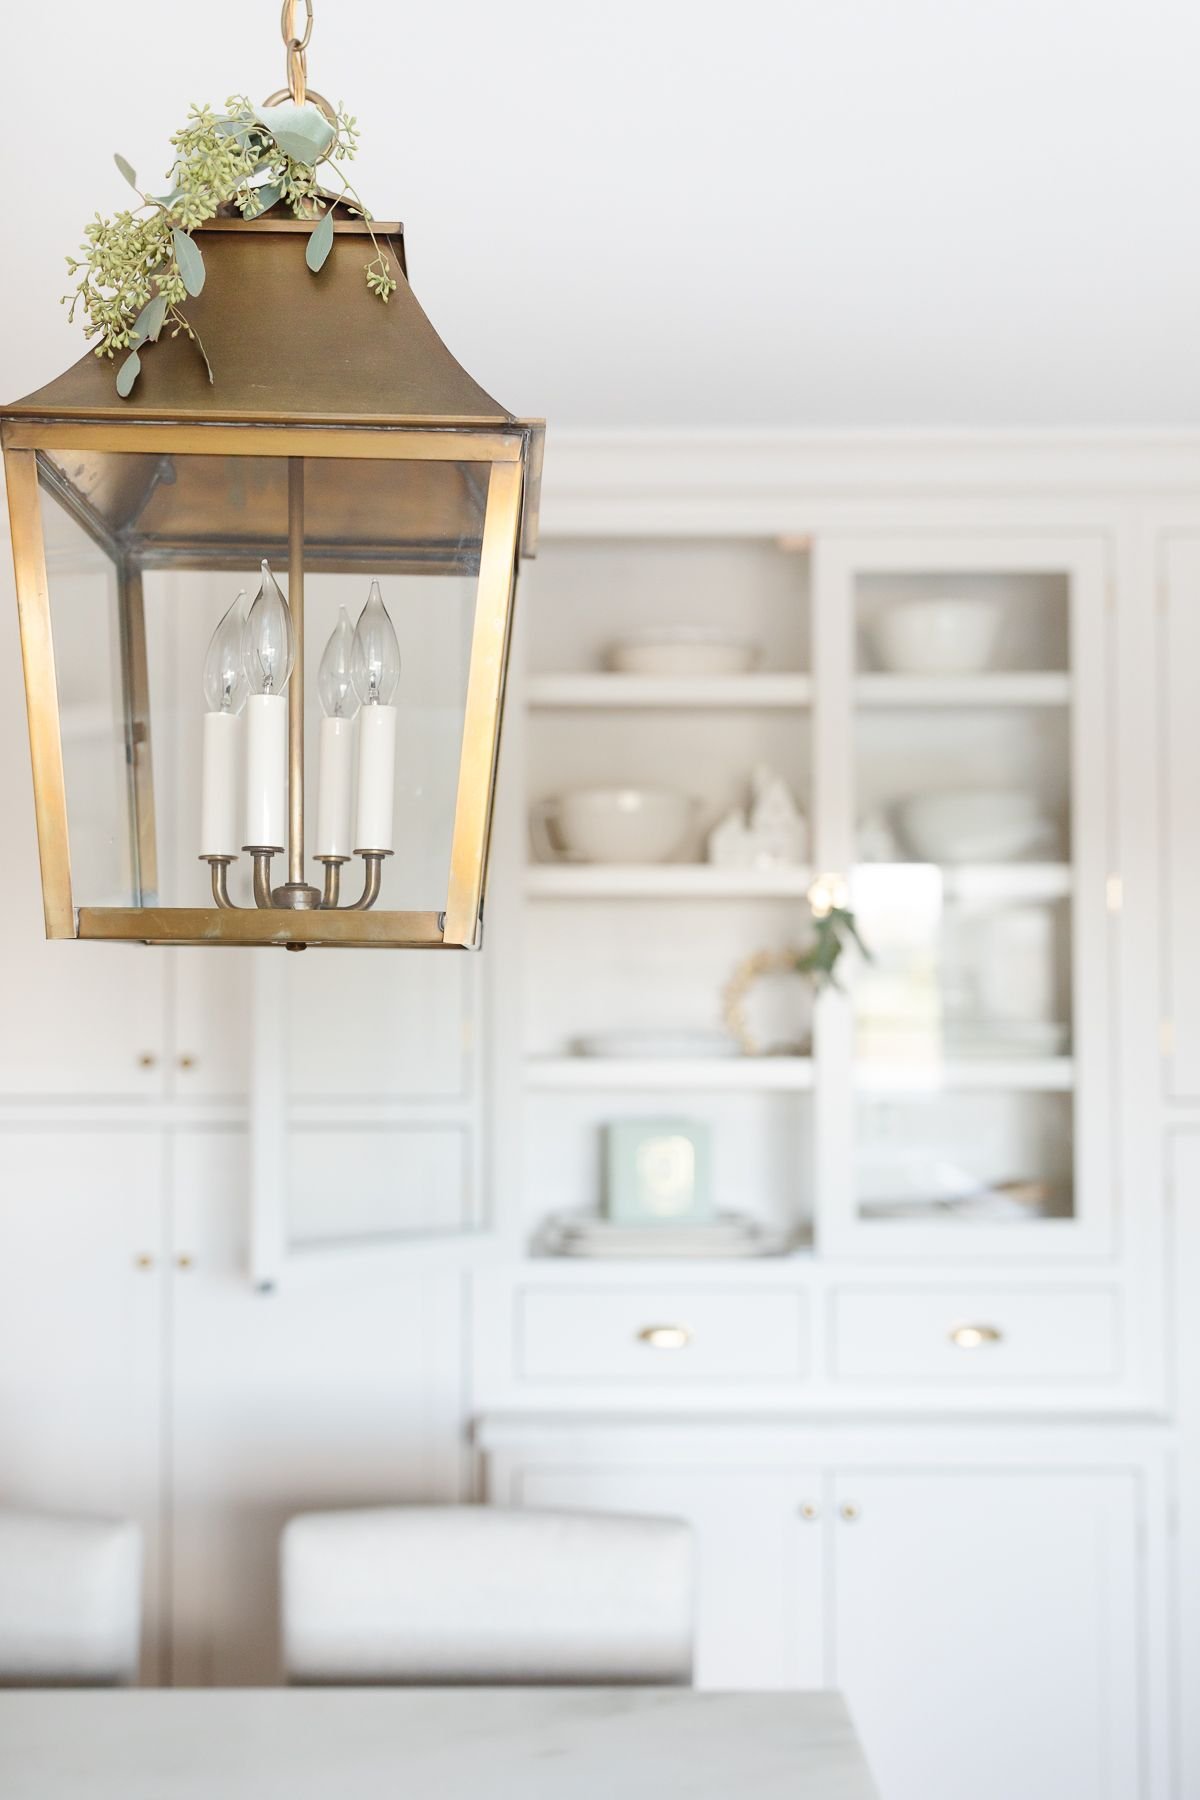 A white kitchen with a brass lantern, decorated in a minimalist Christmas style